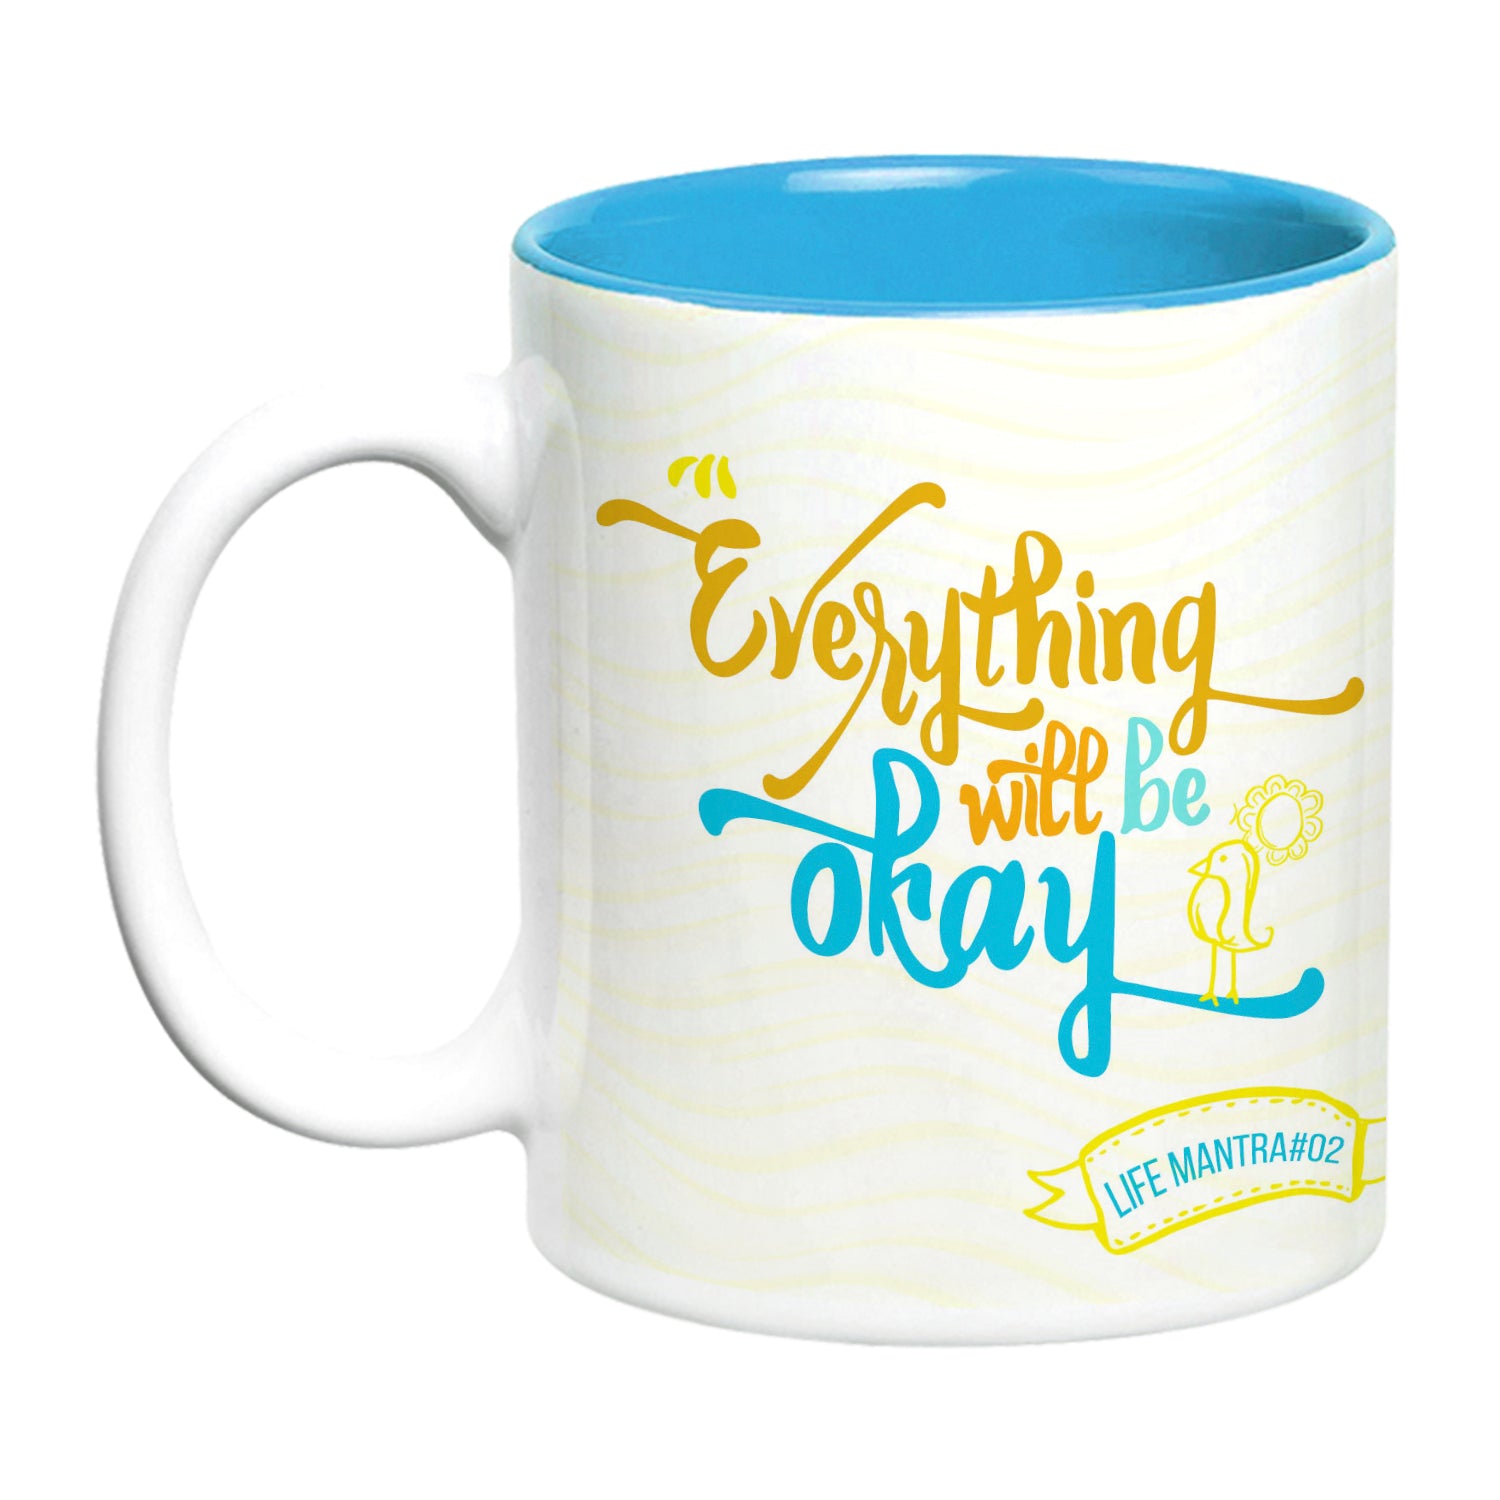 Everything will be okay - Use Your Own Mug